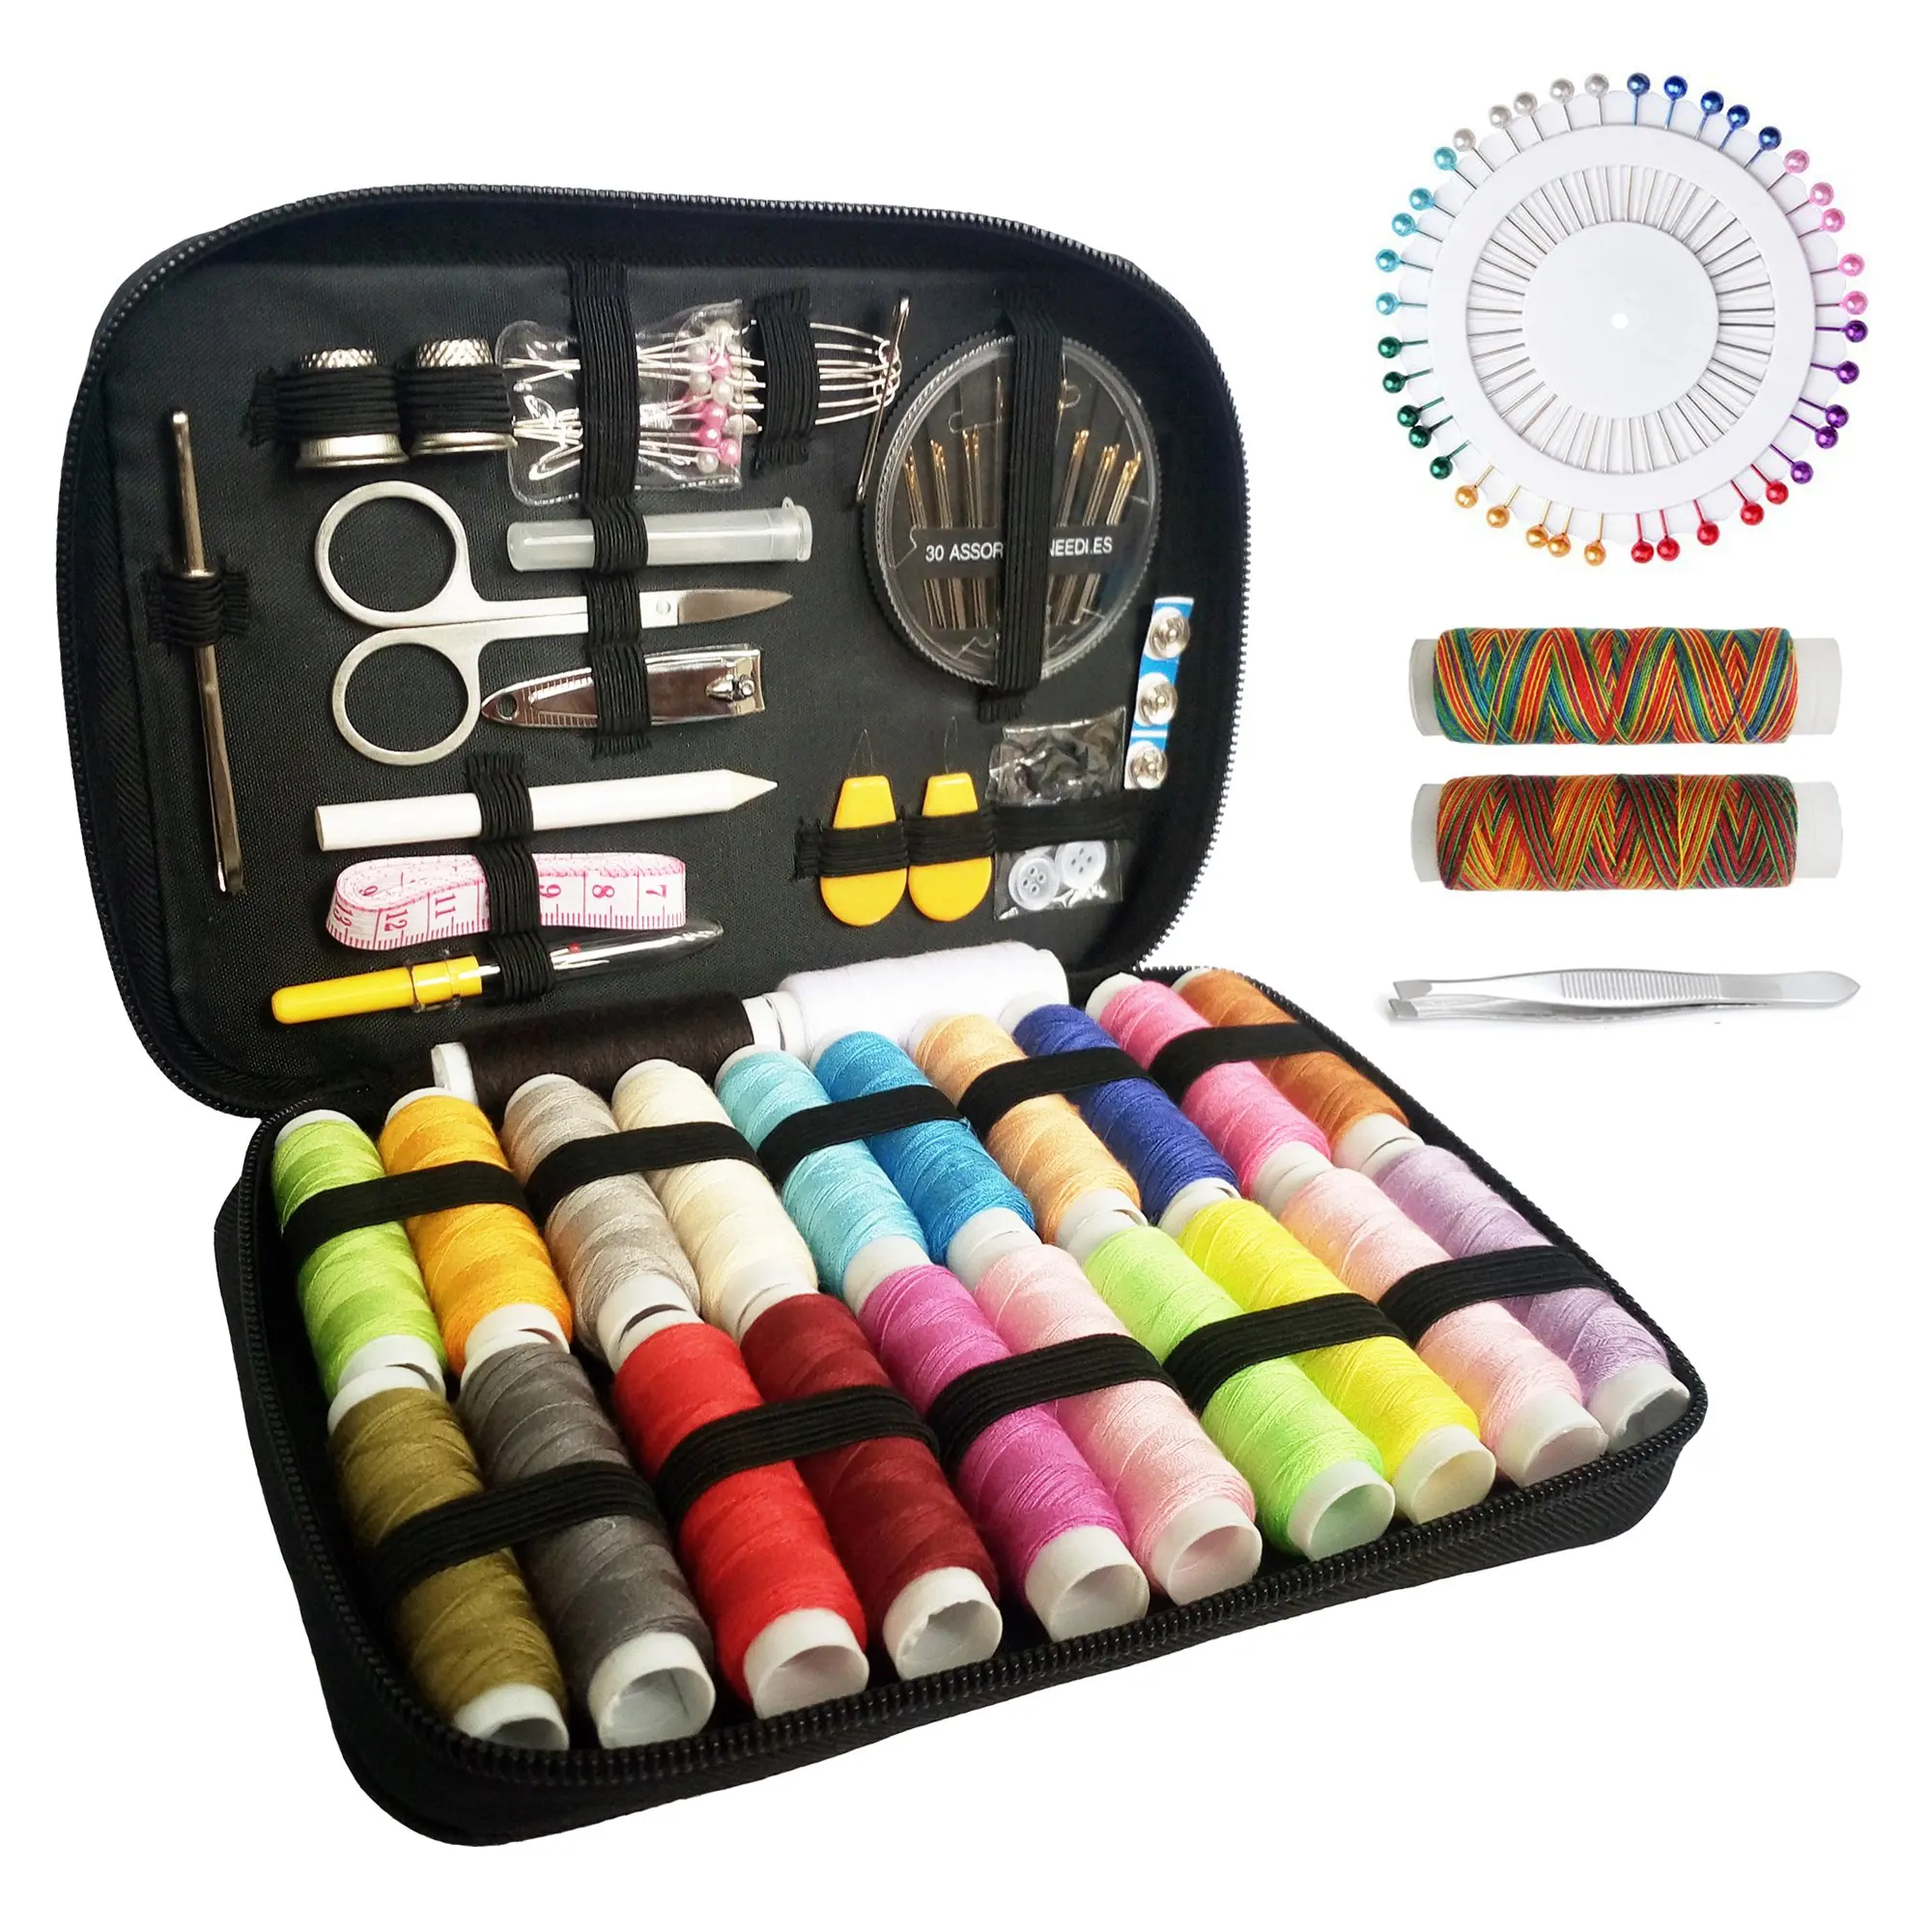 Cheap Basic Sewing Kit, find Basic Sewing Kit deals on line at Alibaba.com